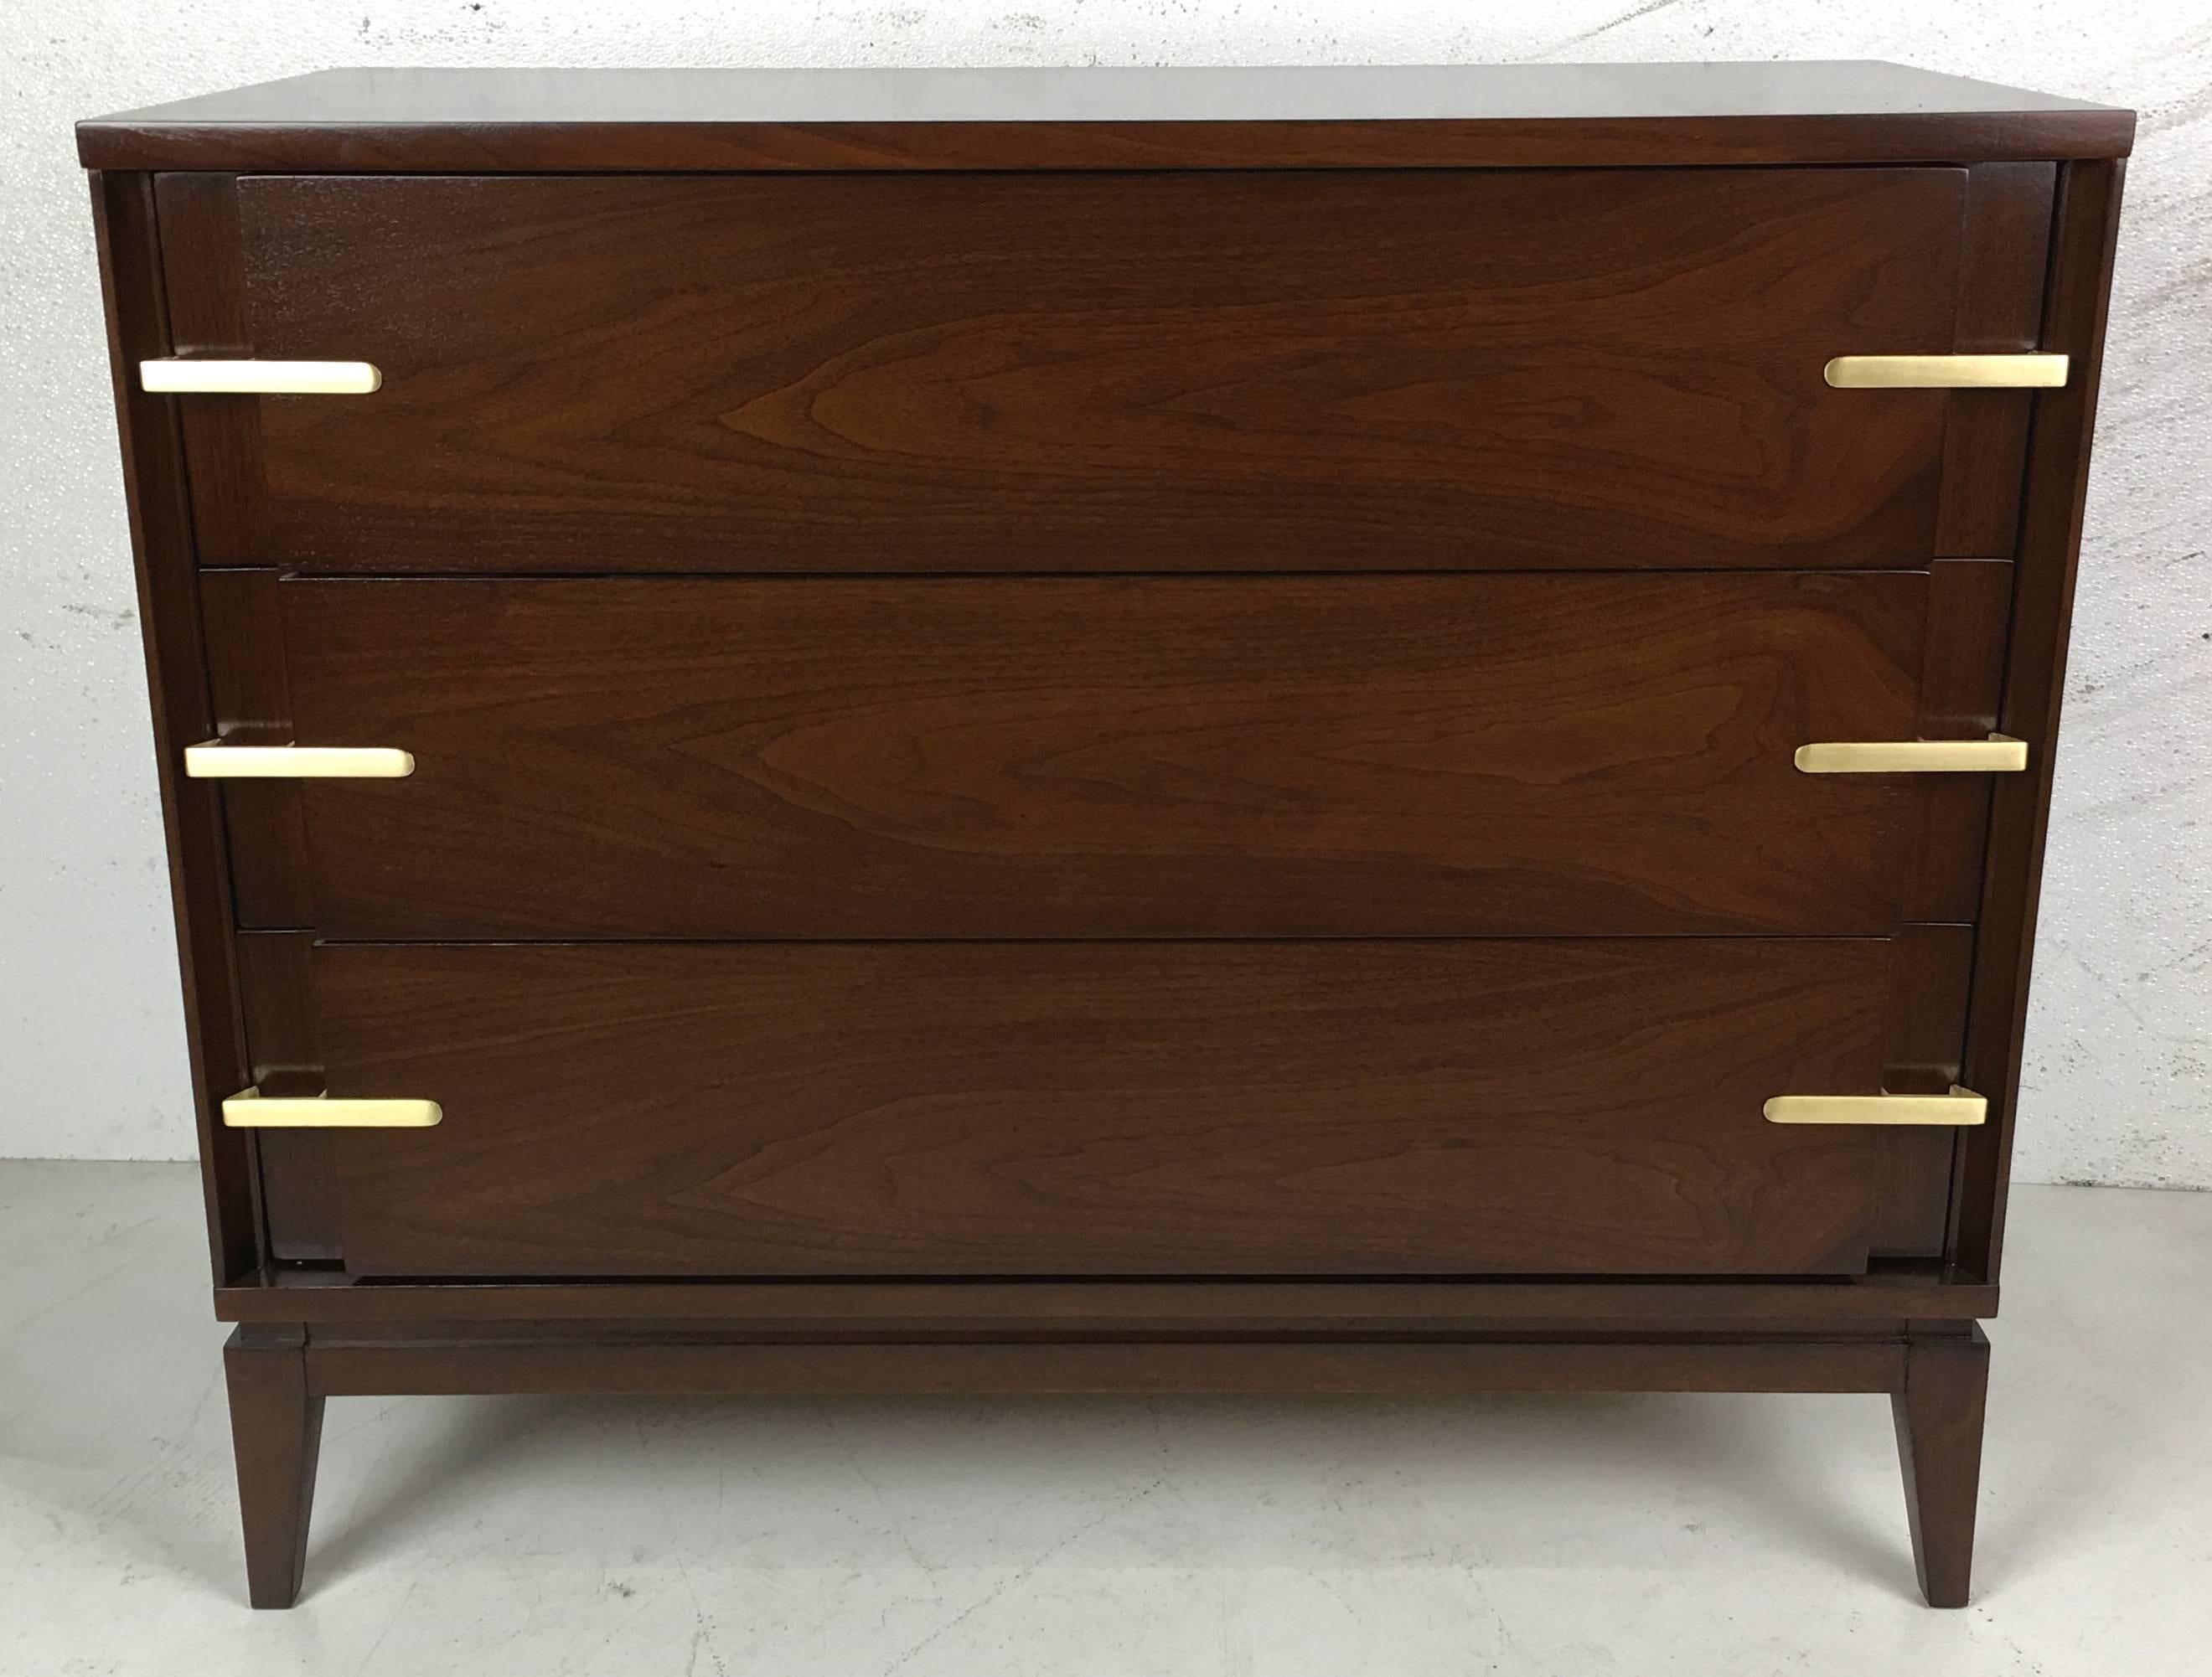 Beautifully grained pair of walnut bachelors chests with inset brass pulls. The pair have been meticulously restored in medium brown lacquer. The drawer pulls have been refinished to a light brushed finish. The chests are reminiscent
of designs by